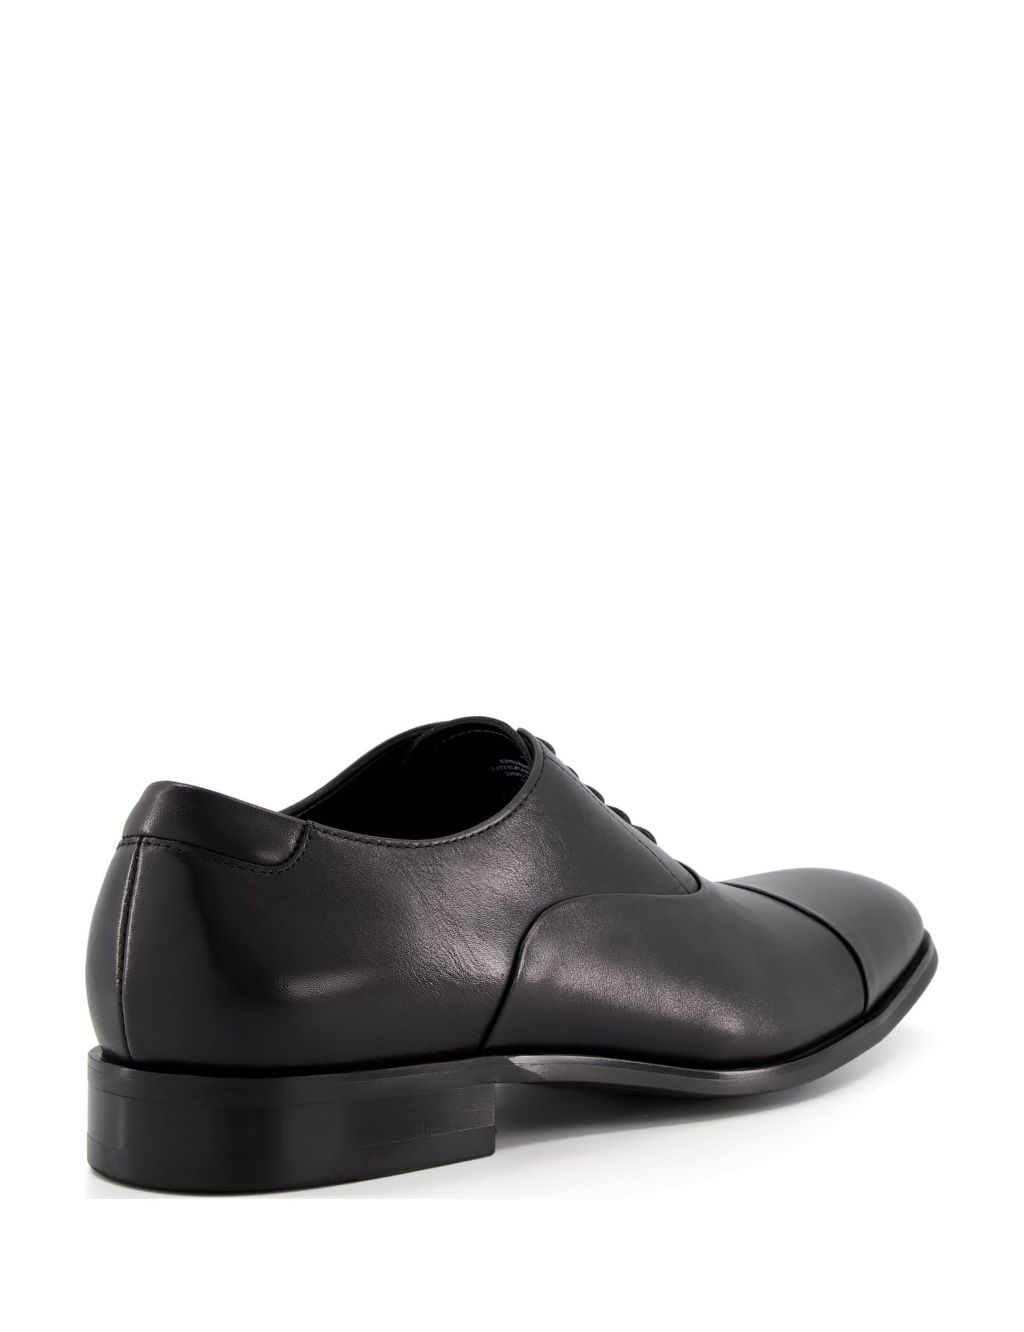 Leather Oxford Shoes image 3